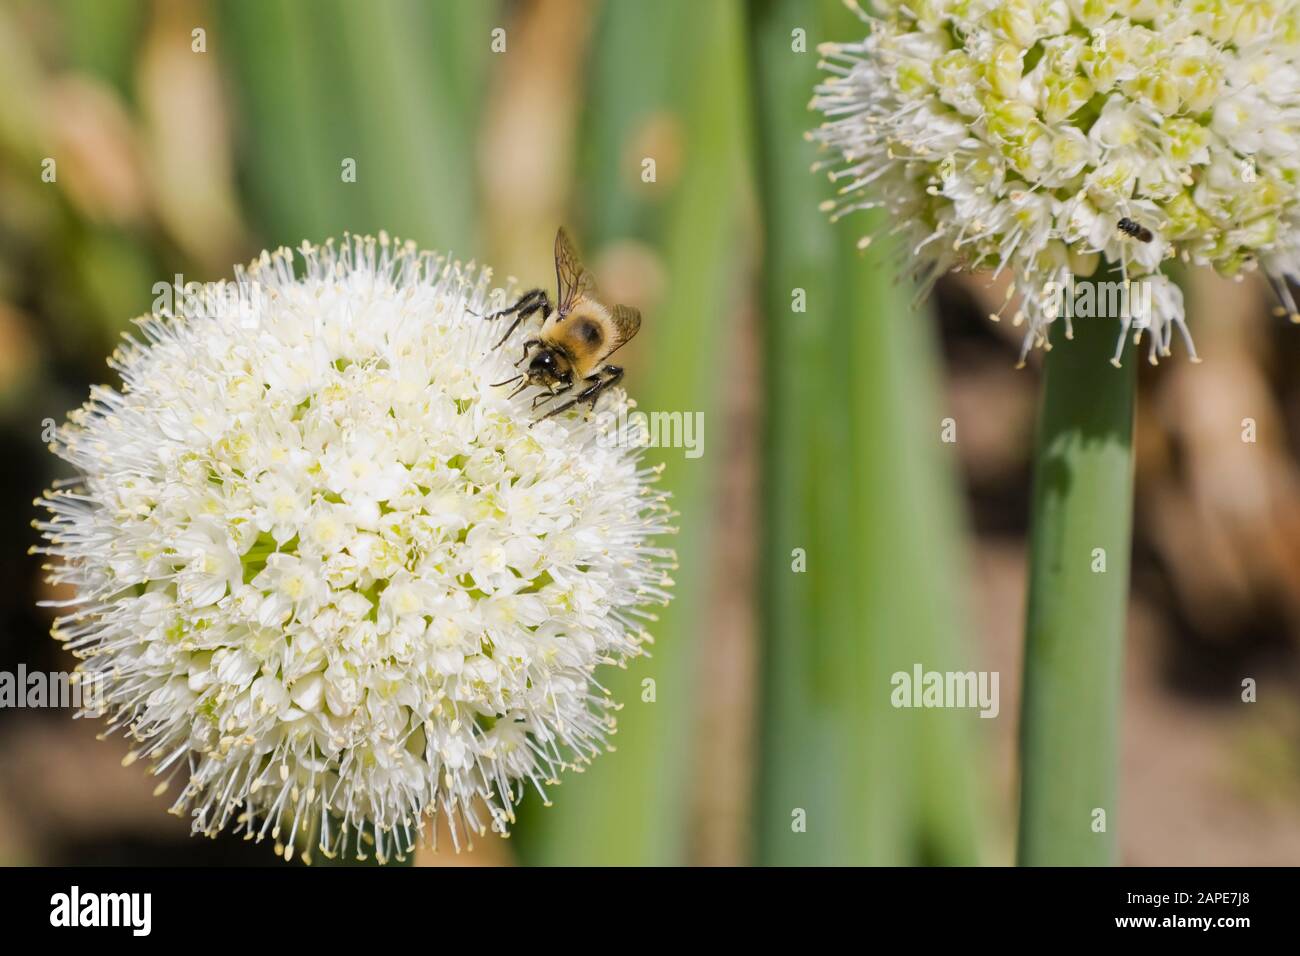 Close-up of Bumbus - Bumblebee foraging for nectar on a white Allium 'Grande'  - Ornamental Garlic flower in summer Stock Photo